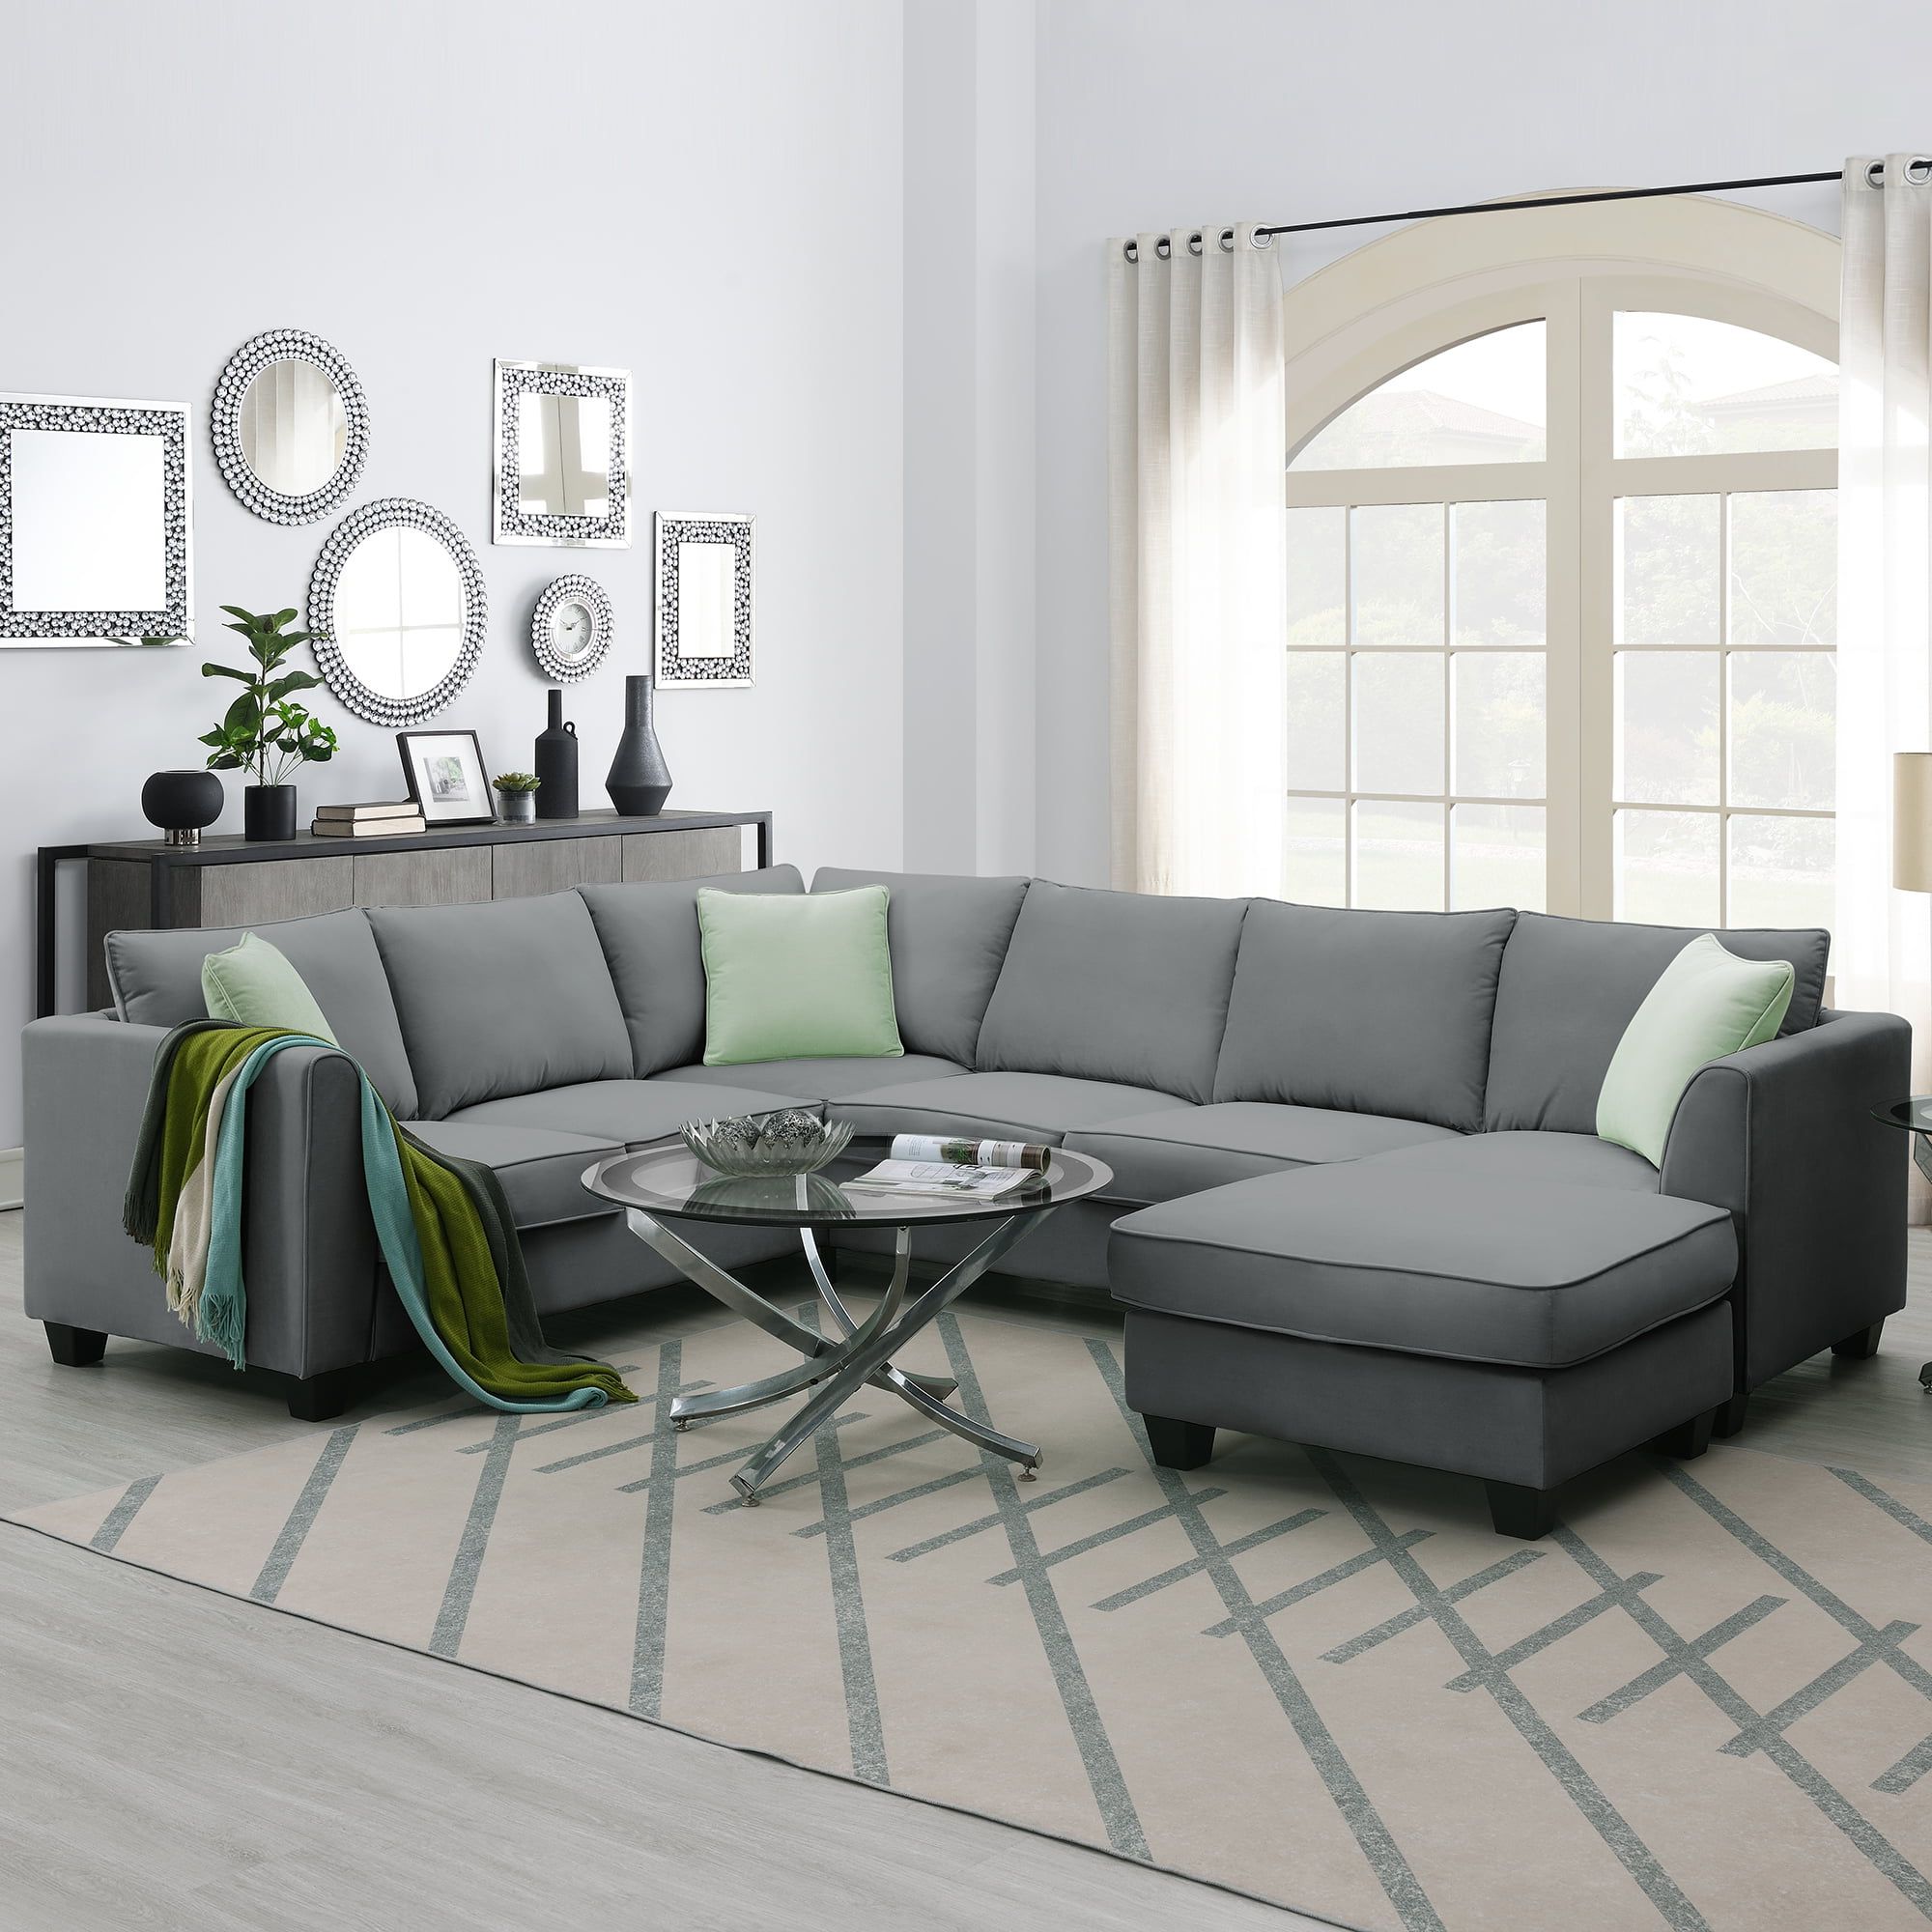 L Shaped Modular Sectional Couch, Kamida 7 Seater Sectional Couch With  Ottoman And 3 Pillows, Modern L Shaped Fabric Upholstered Couch Furniture,  Heavy Duty Sectional Couch For Living Room, Gray – Walmart Within 7 Seater Sectional Couch With Ottoman And 3 Pillows (Gallery 2 of 20)